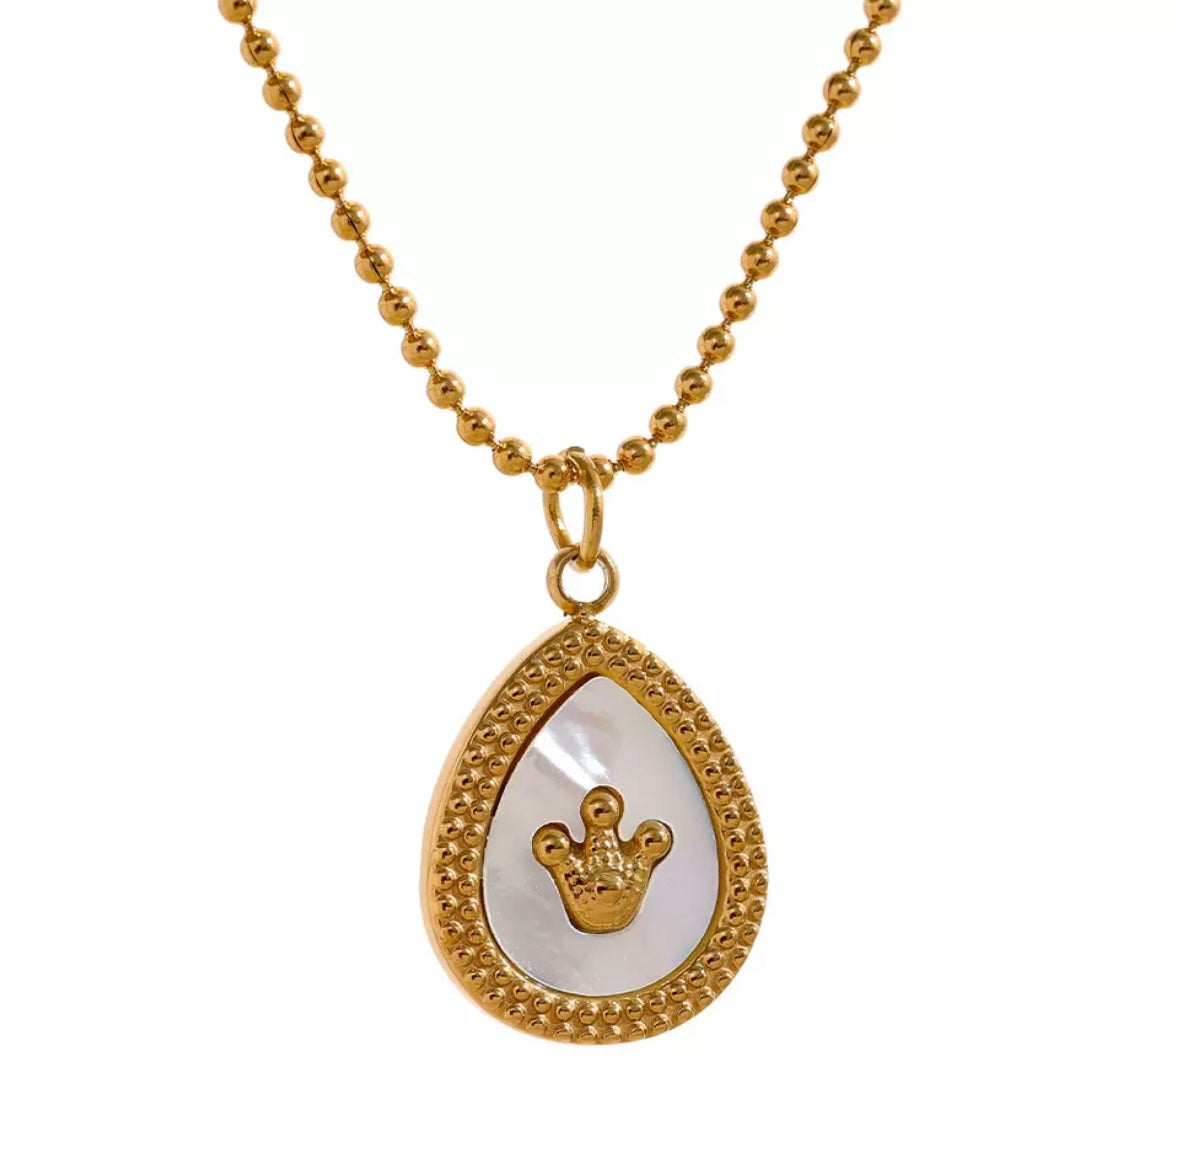 crown charm pendant necklace for women. This 18k solid gold necklace is water drop shaped, vintage, delicate and elegant. The jewelry can be worn everyday as it is waterproof and tarnish free.